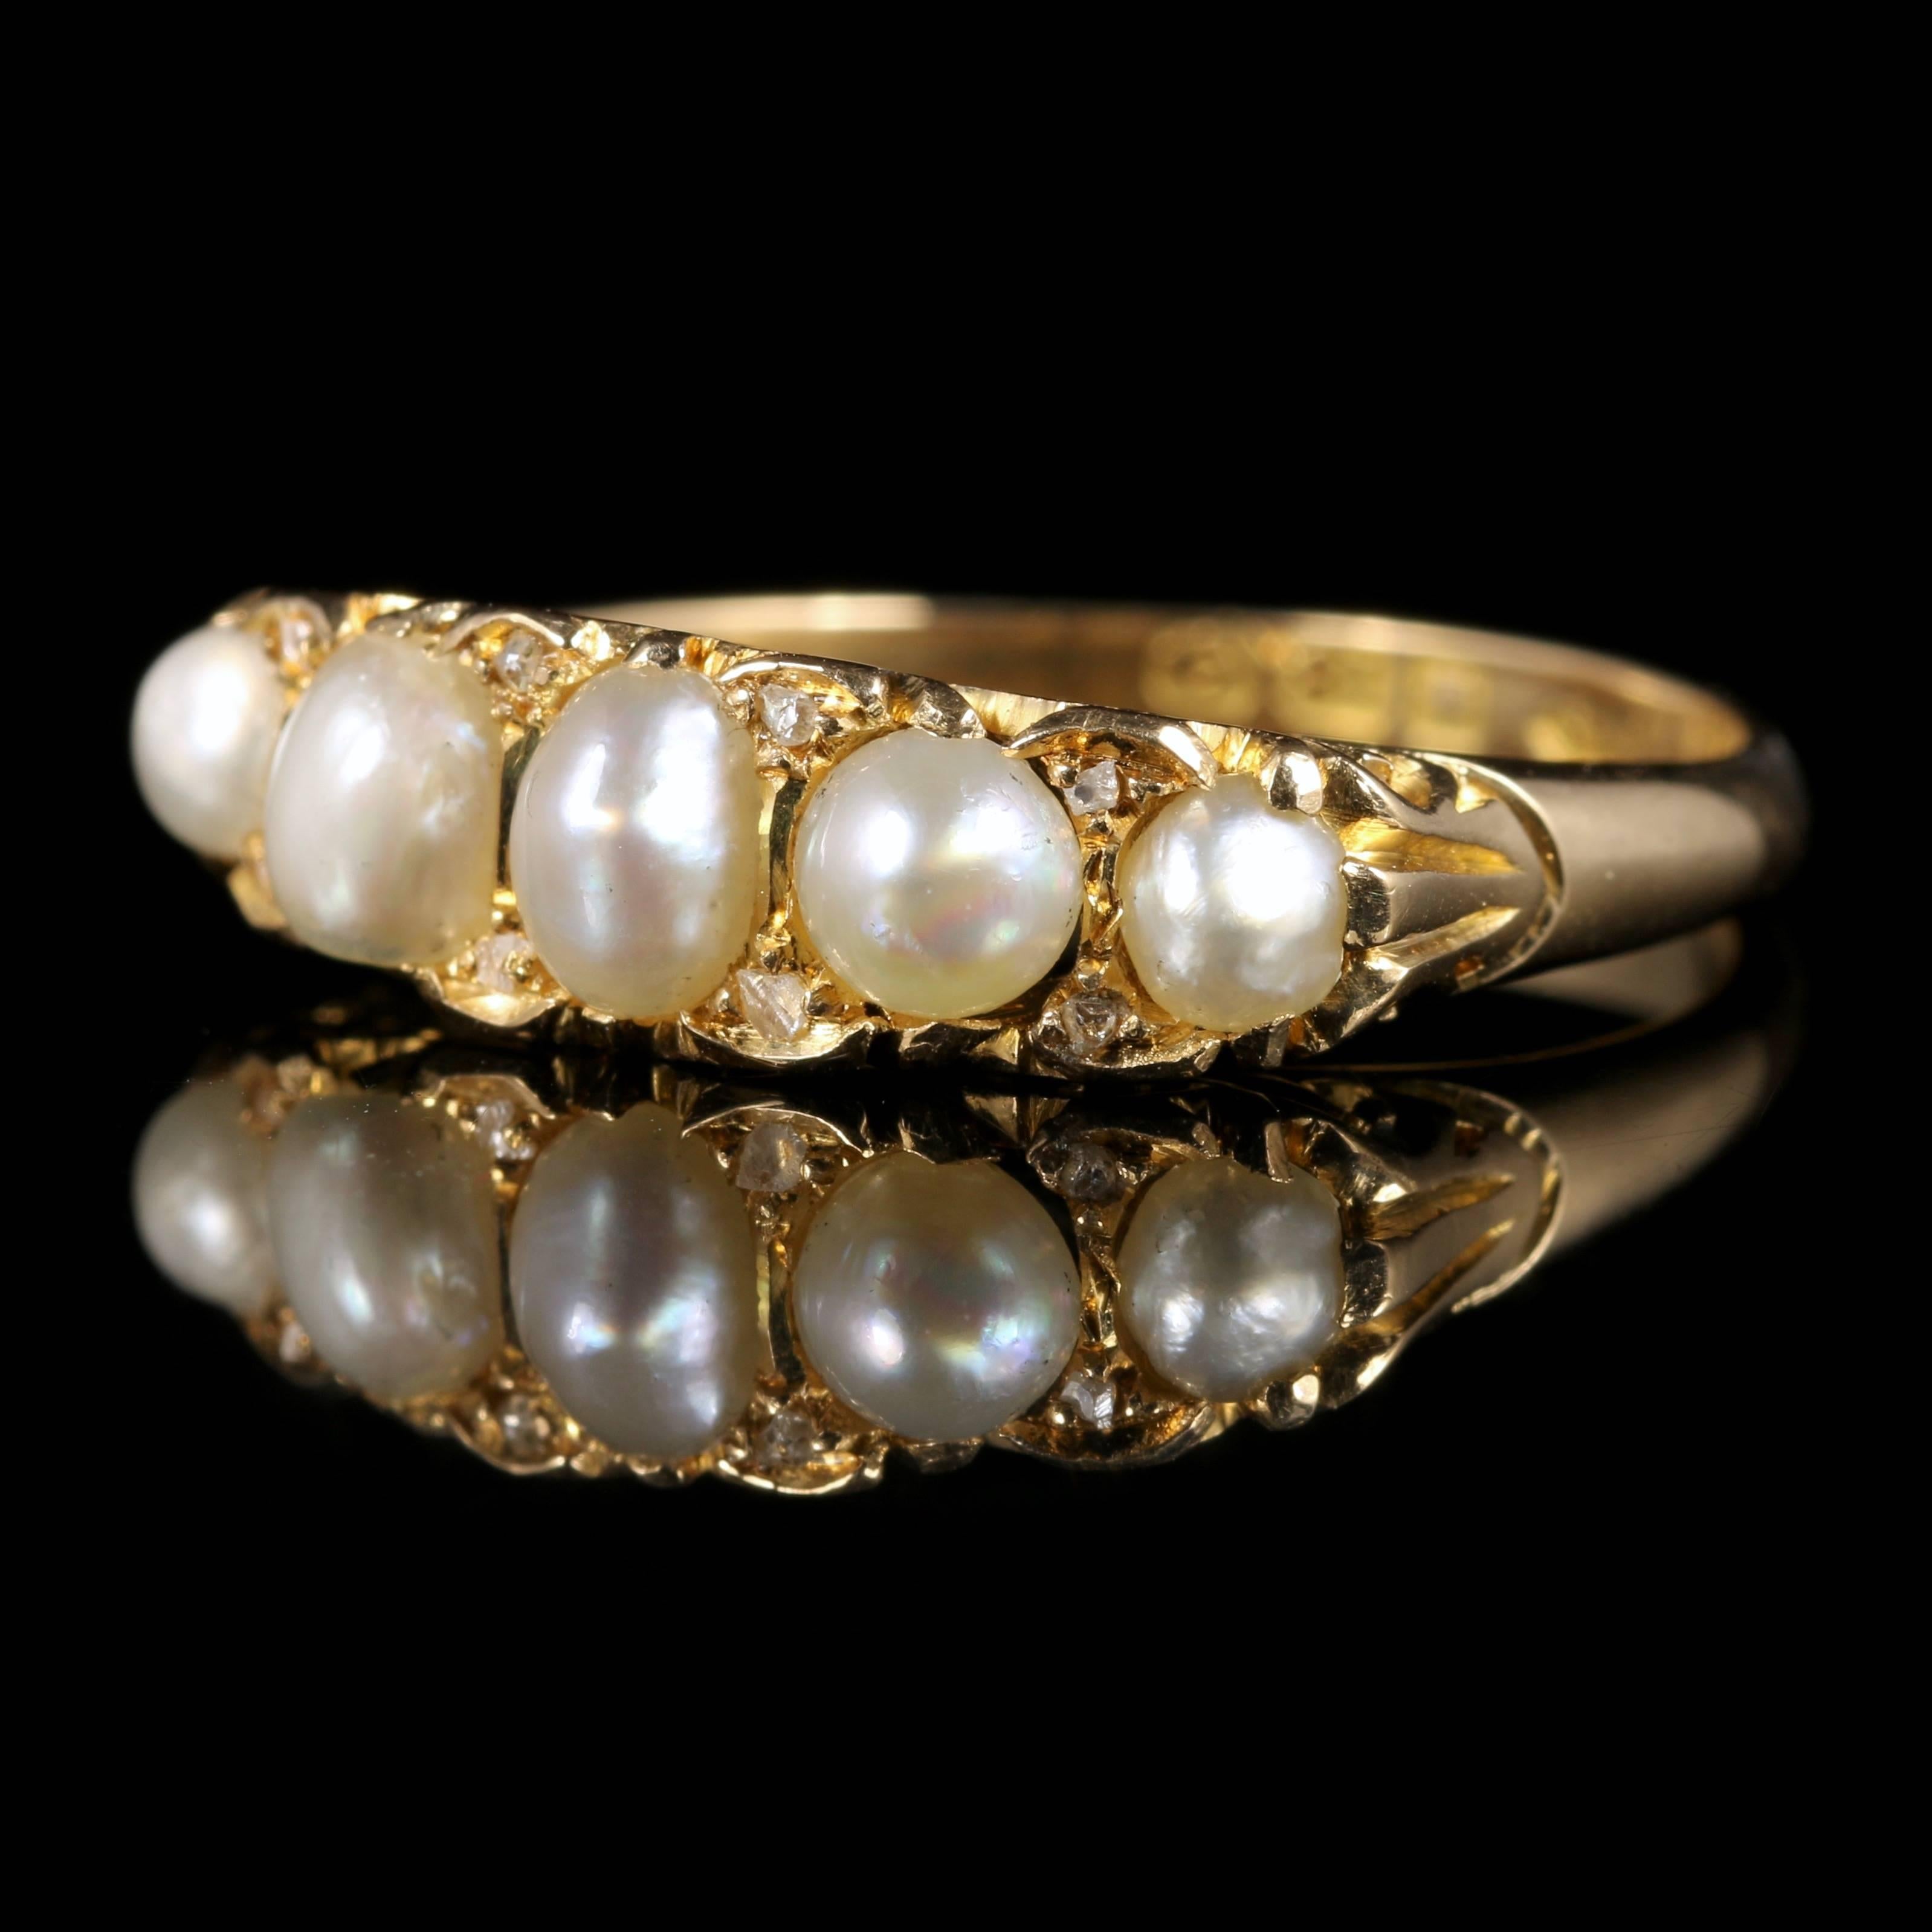 For more details please click continue reading down below...

This fabulous 18ct Yellow Gold ring is Victorian, Circa 1870.

Boasting 5 amazing Pearls with 8 rose cut Diamonds nestled in between, this really is a special ring.

The shank is